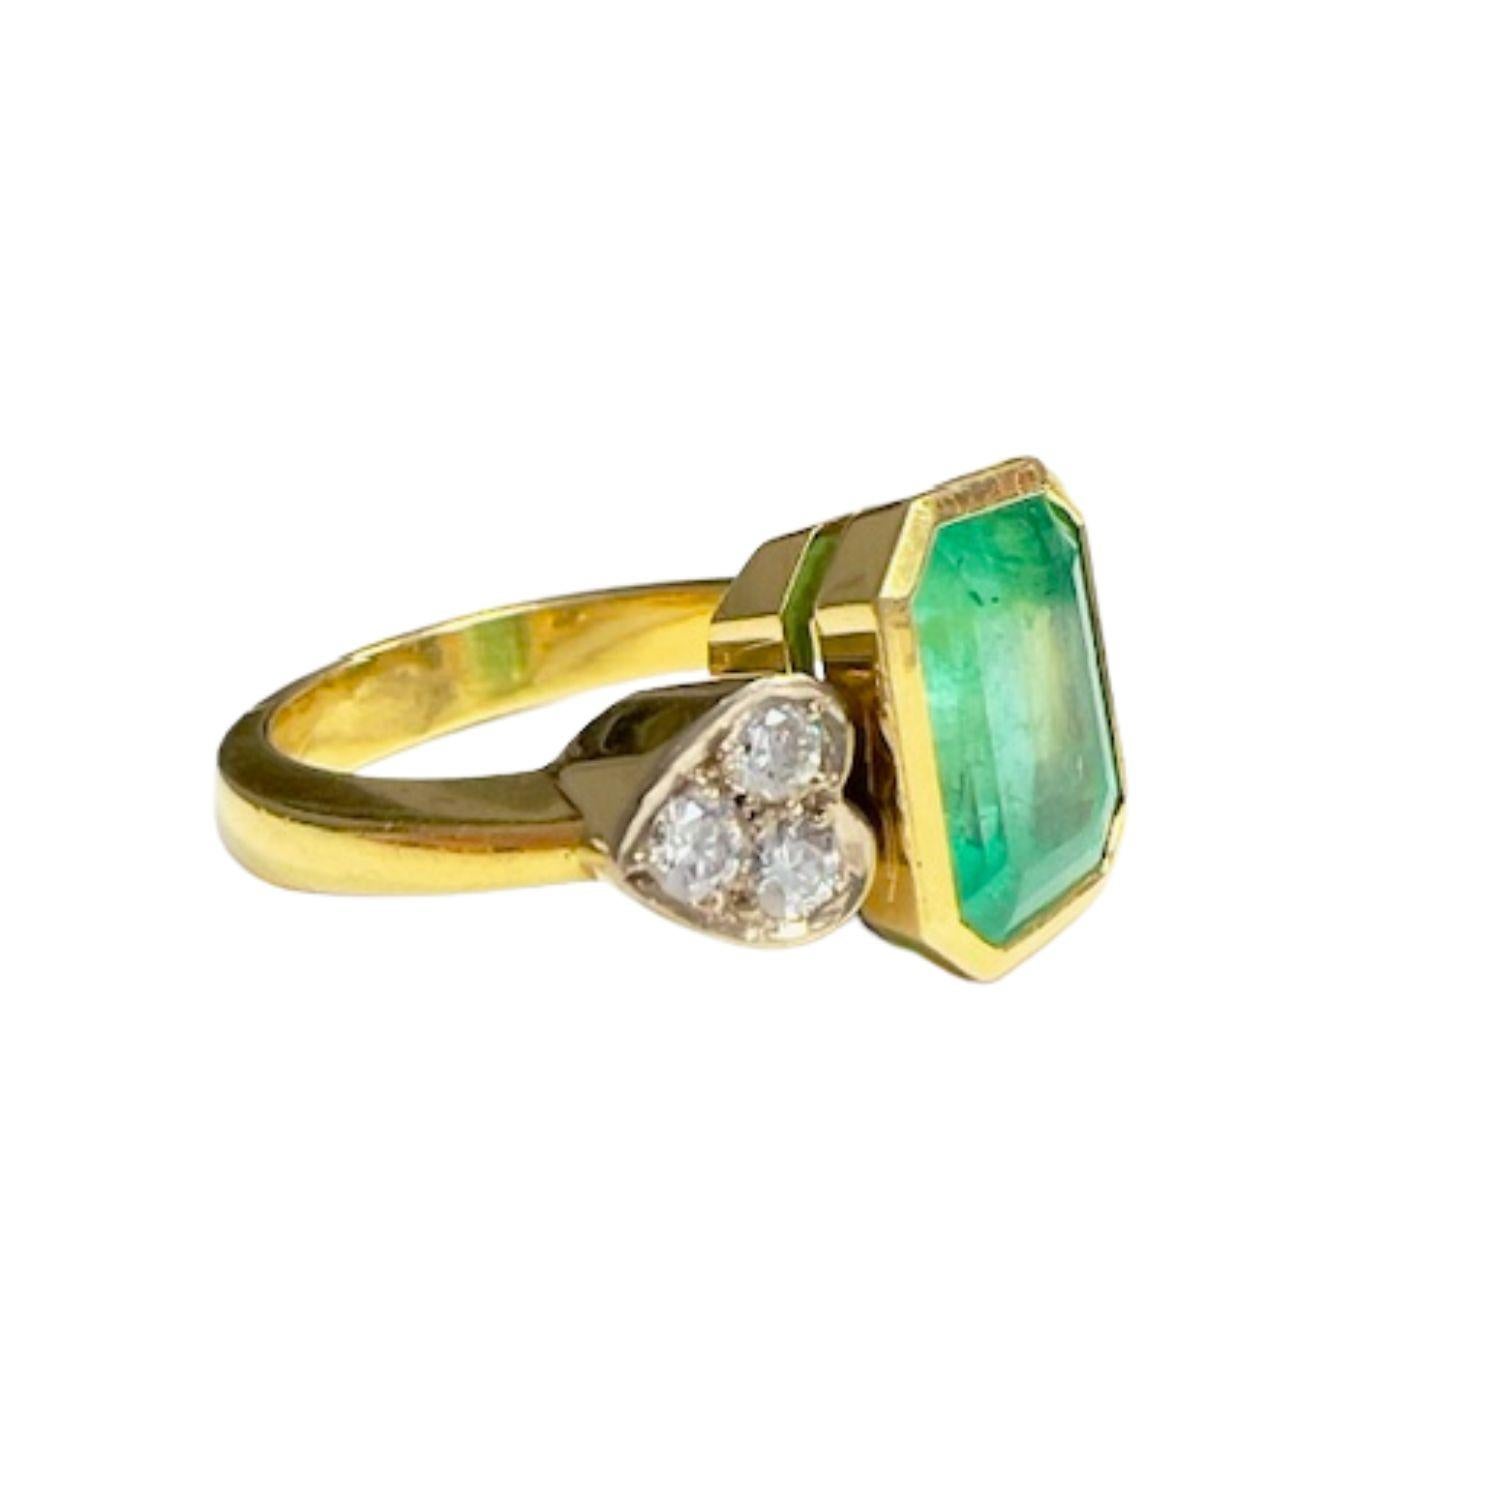 Contemporary ring from the 20th century, crafted in 18k yellow gold and adorned with diamonds and emeralds. Featuring a stunning emerald center cut in AAA emerald cut weighing 4.45 ct, with dimensions of 9.9x7.9x6.40 (originating from Colombia), and